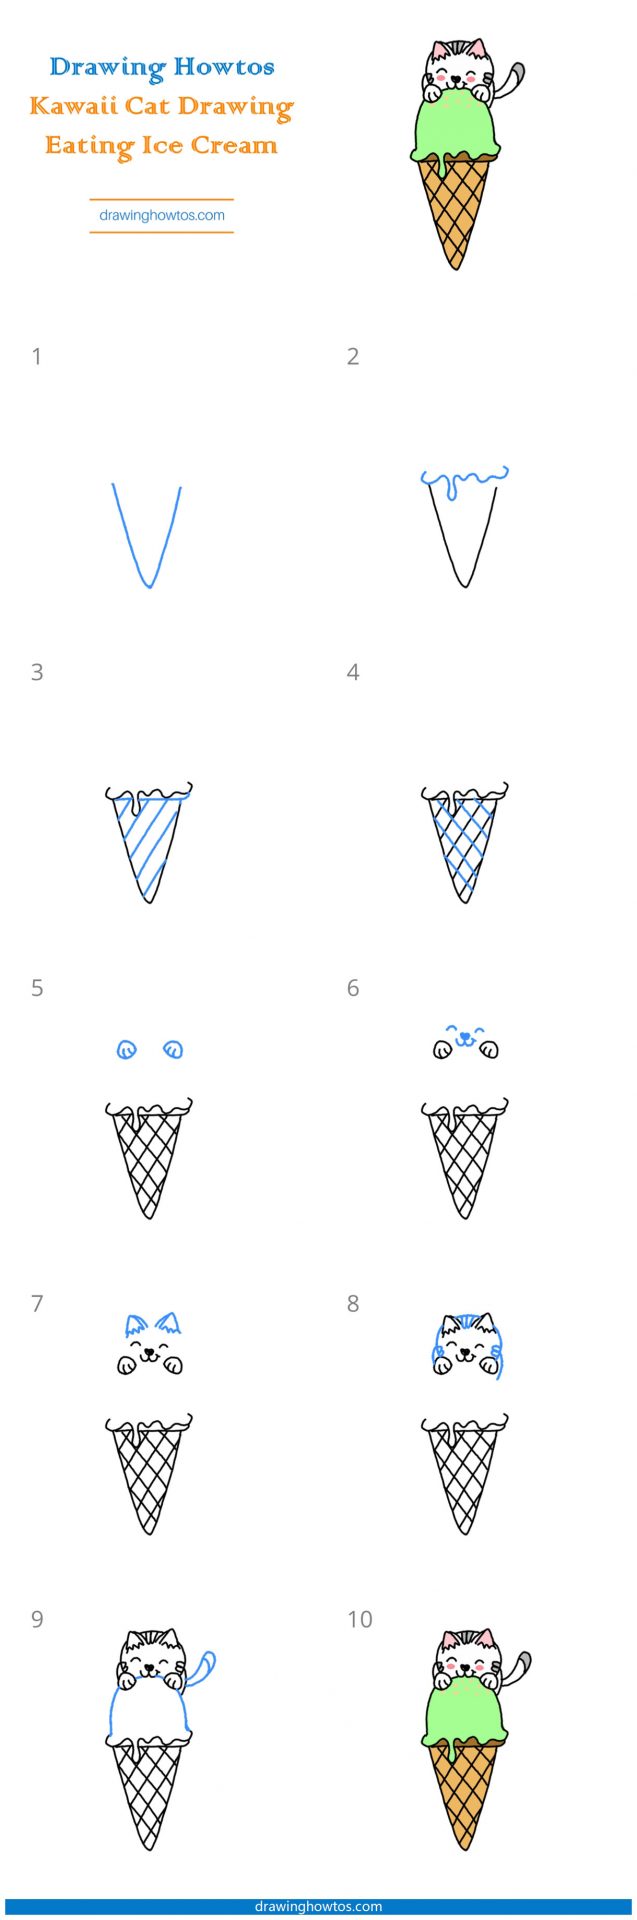 How to Draw a Kawaii Cat Eating Ice Cream Step by Step